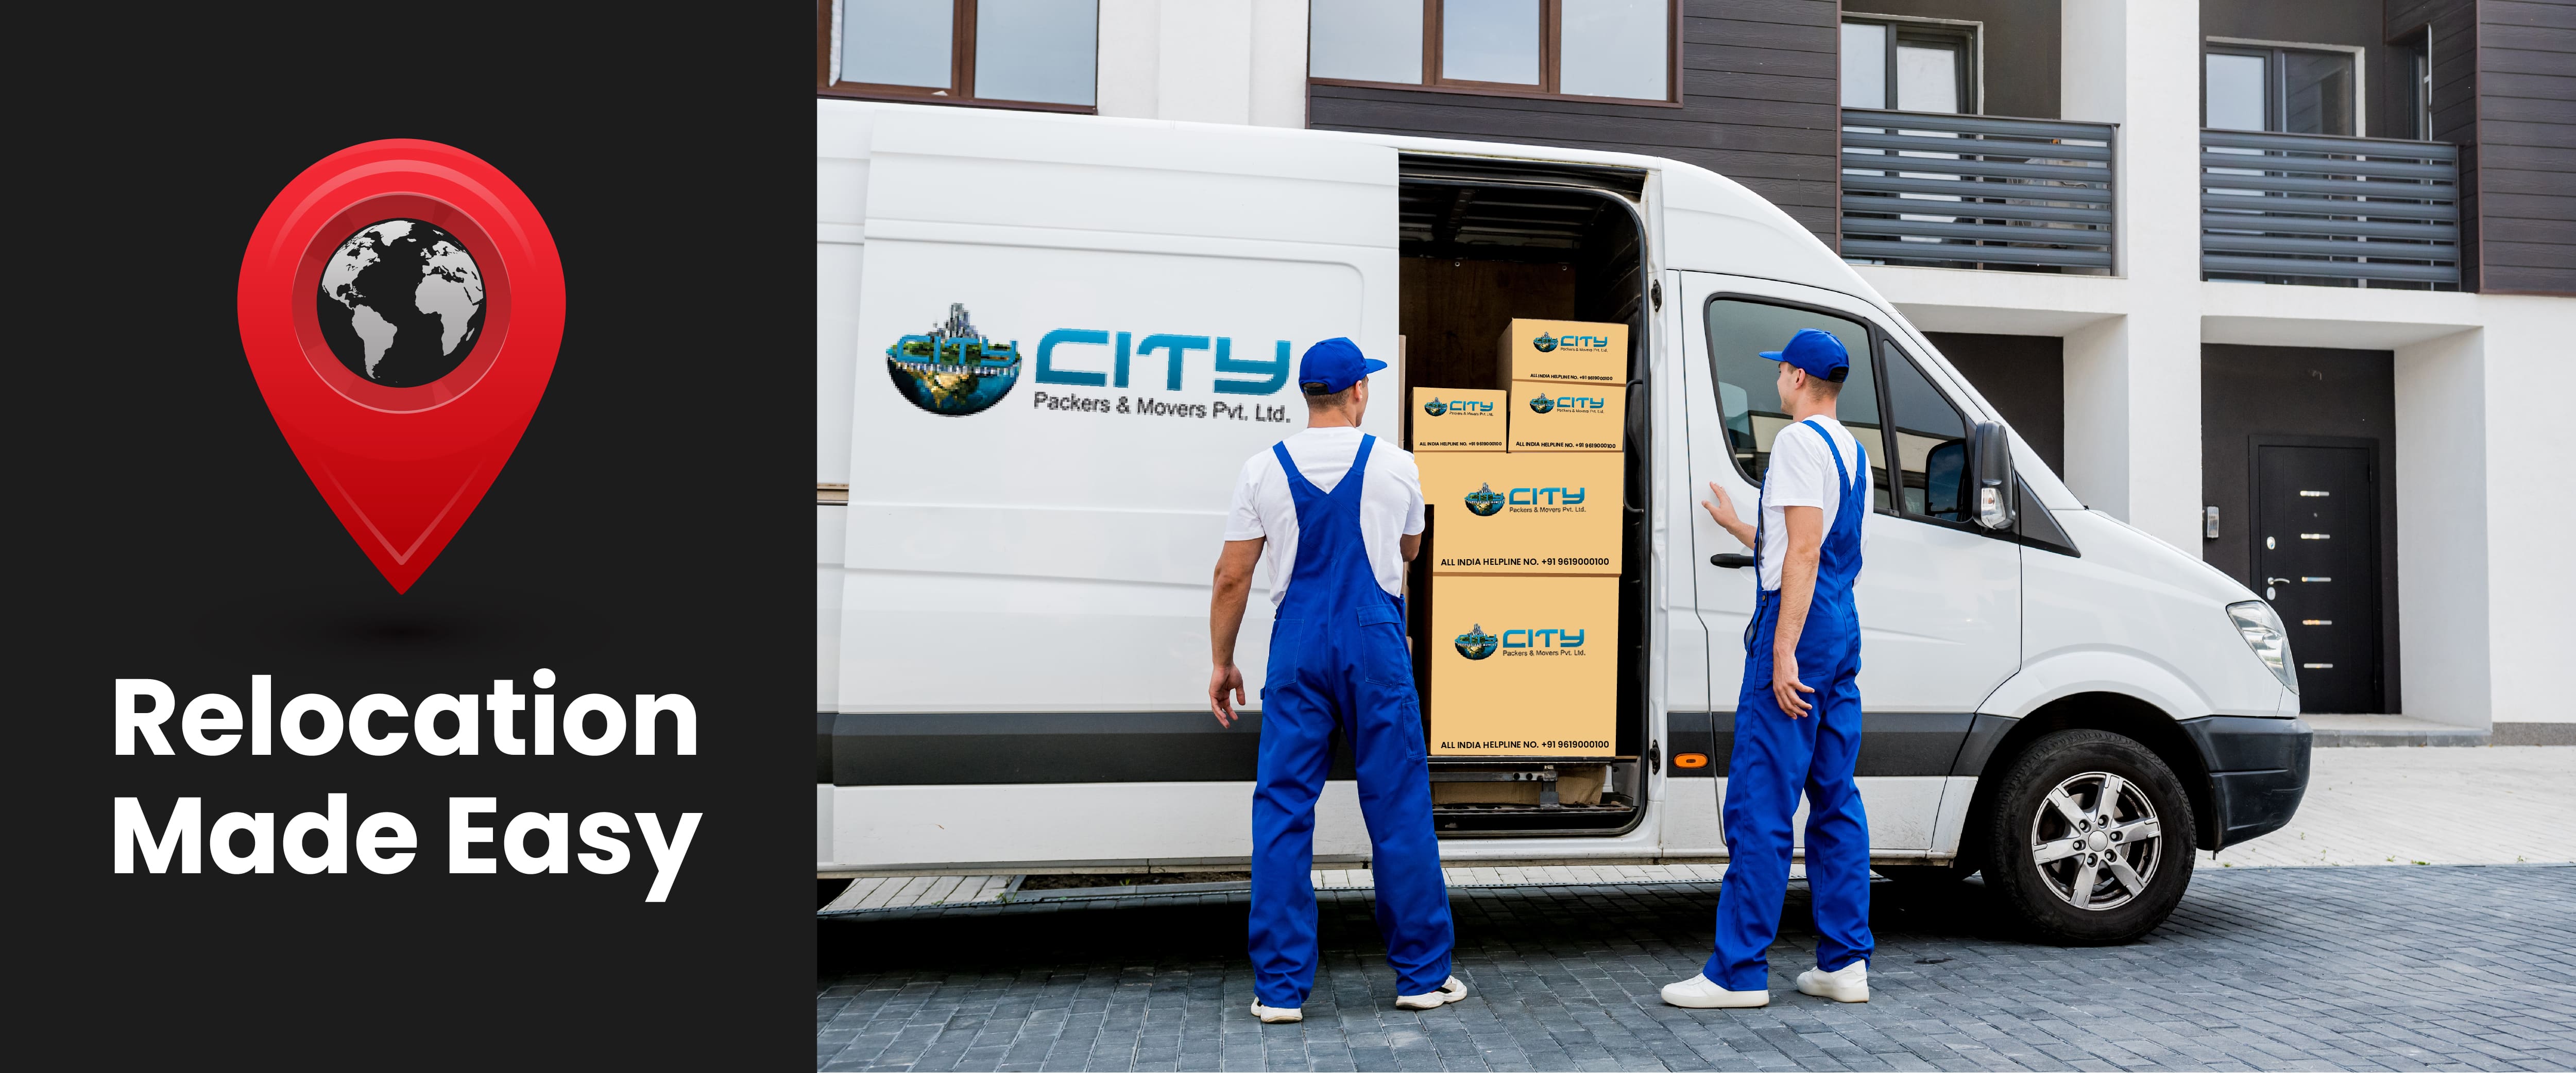 City Packers and Movers India